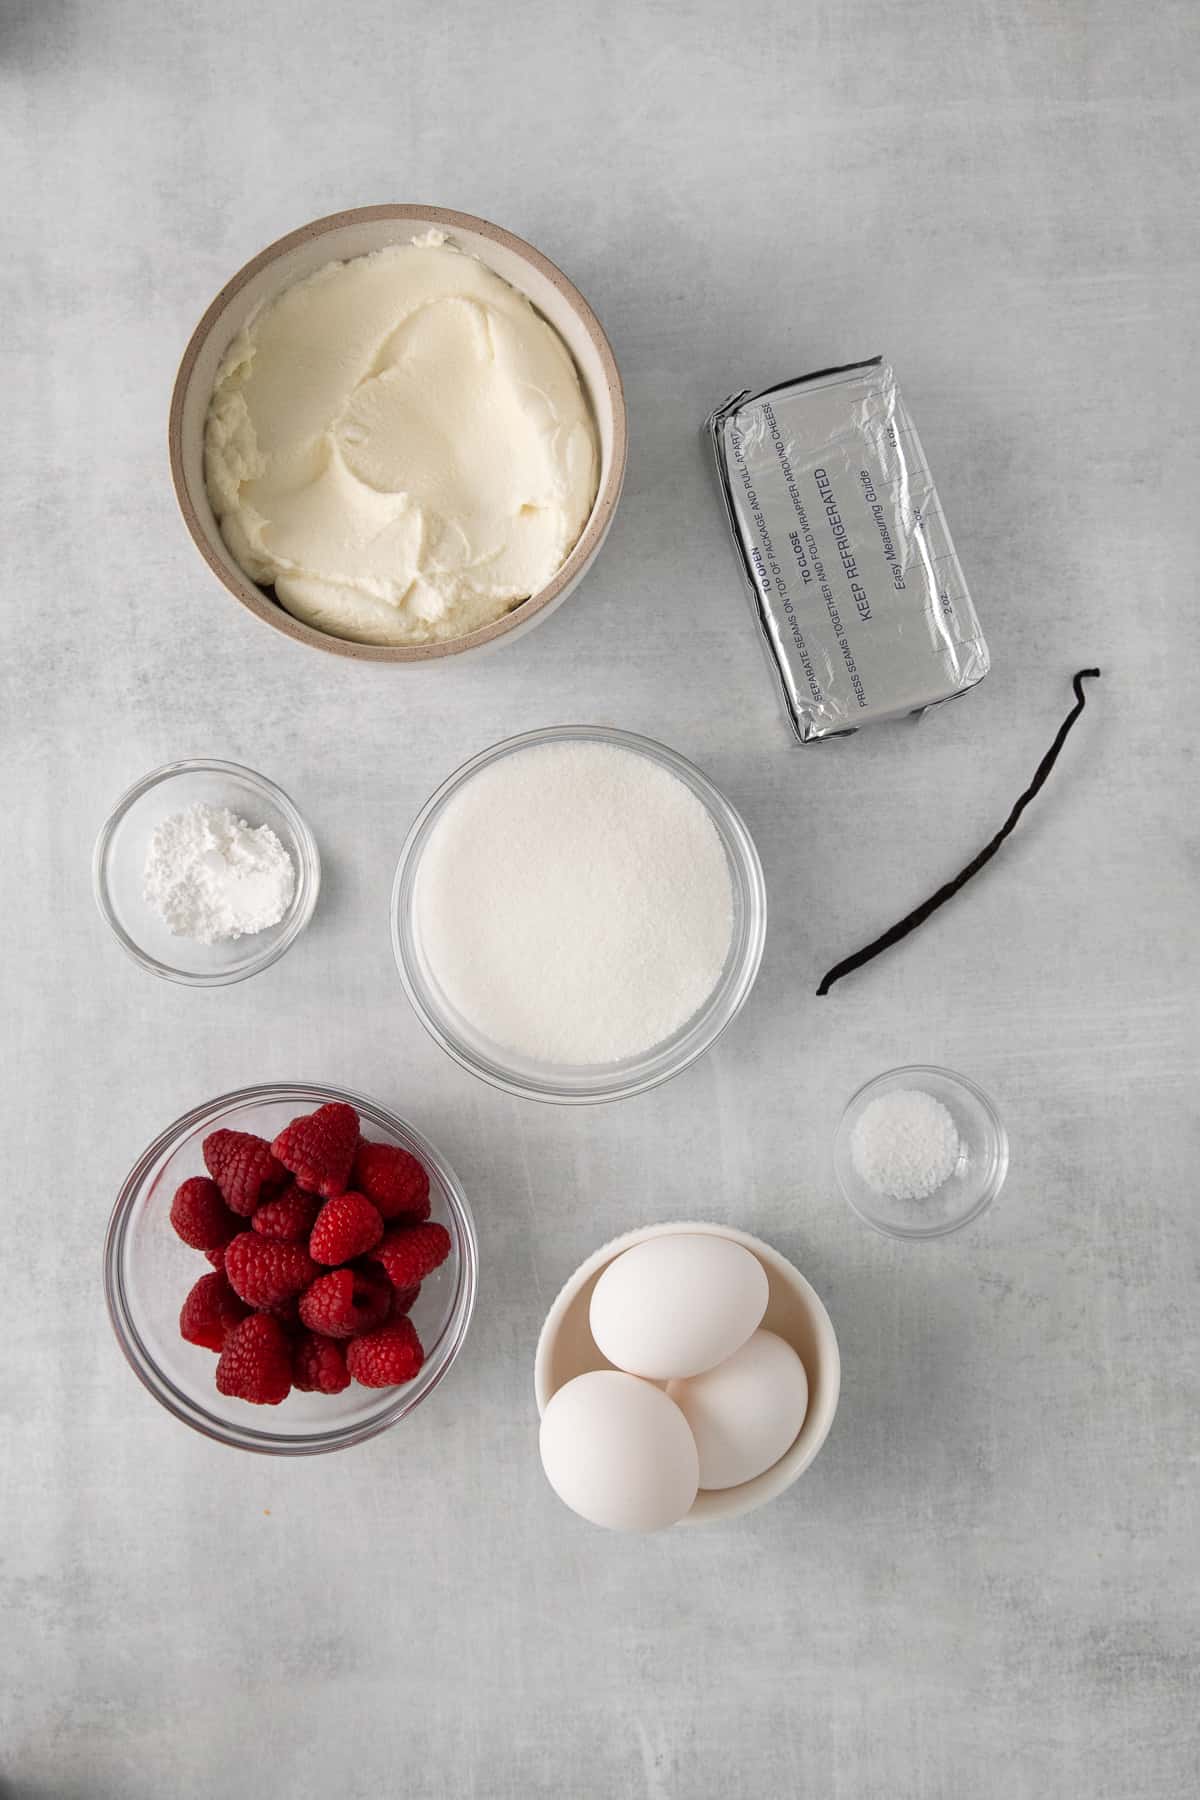 Ingredients for ricotta cheesecake filling.